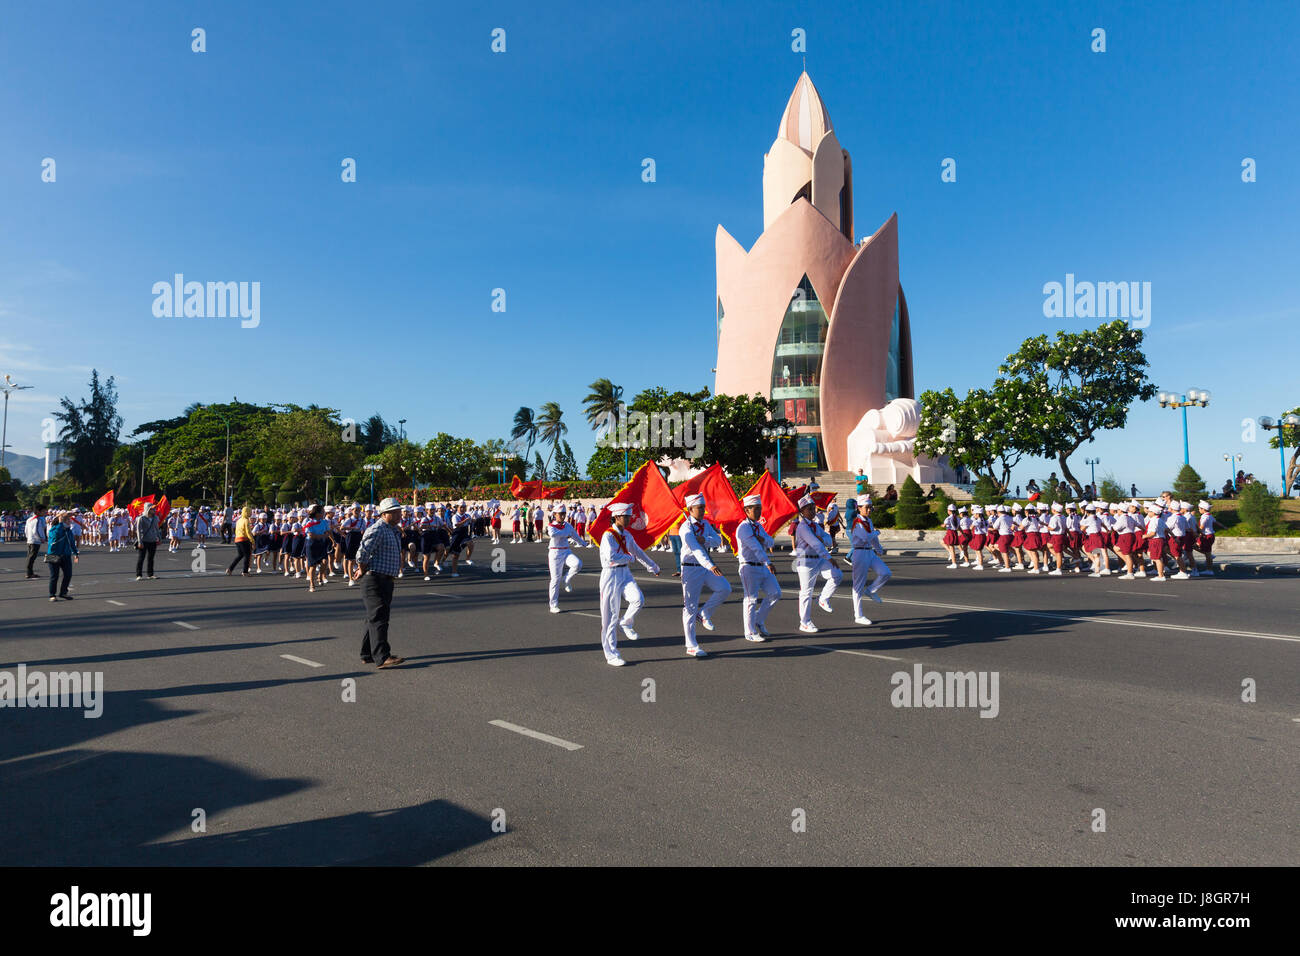 Nha Trang, Vietnam - May 31, 2016: Pioneer children march on the parade at the end of the school year in Nha Trang, Vietnam on May 31, 2016. Stock Photo